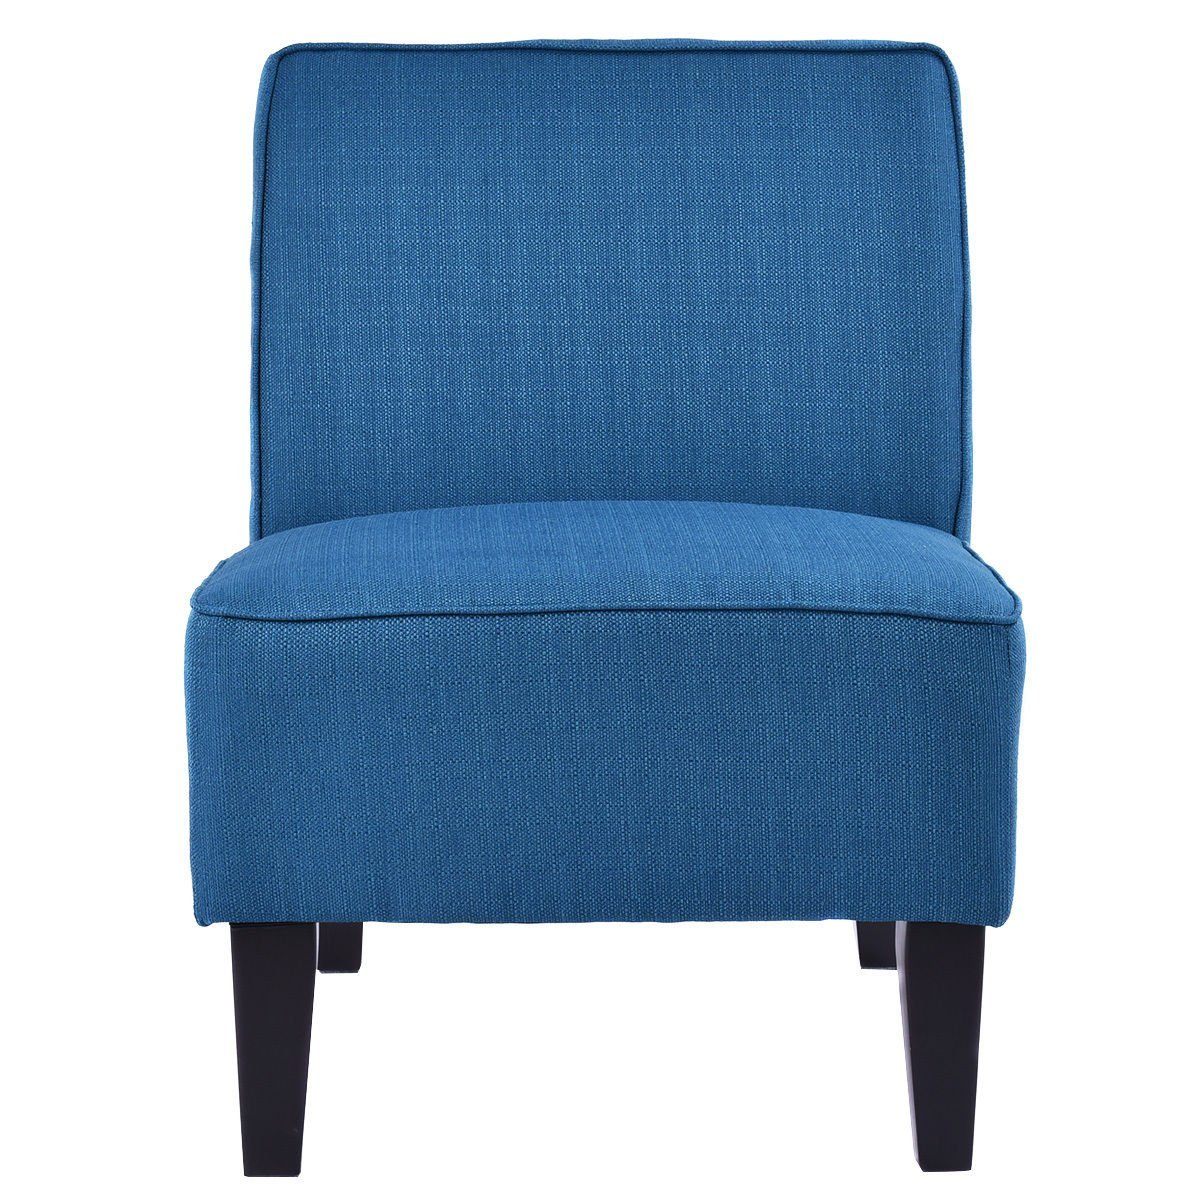 Blue Accent Chairs For Living Room - Decor Ideas